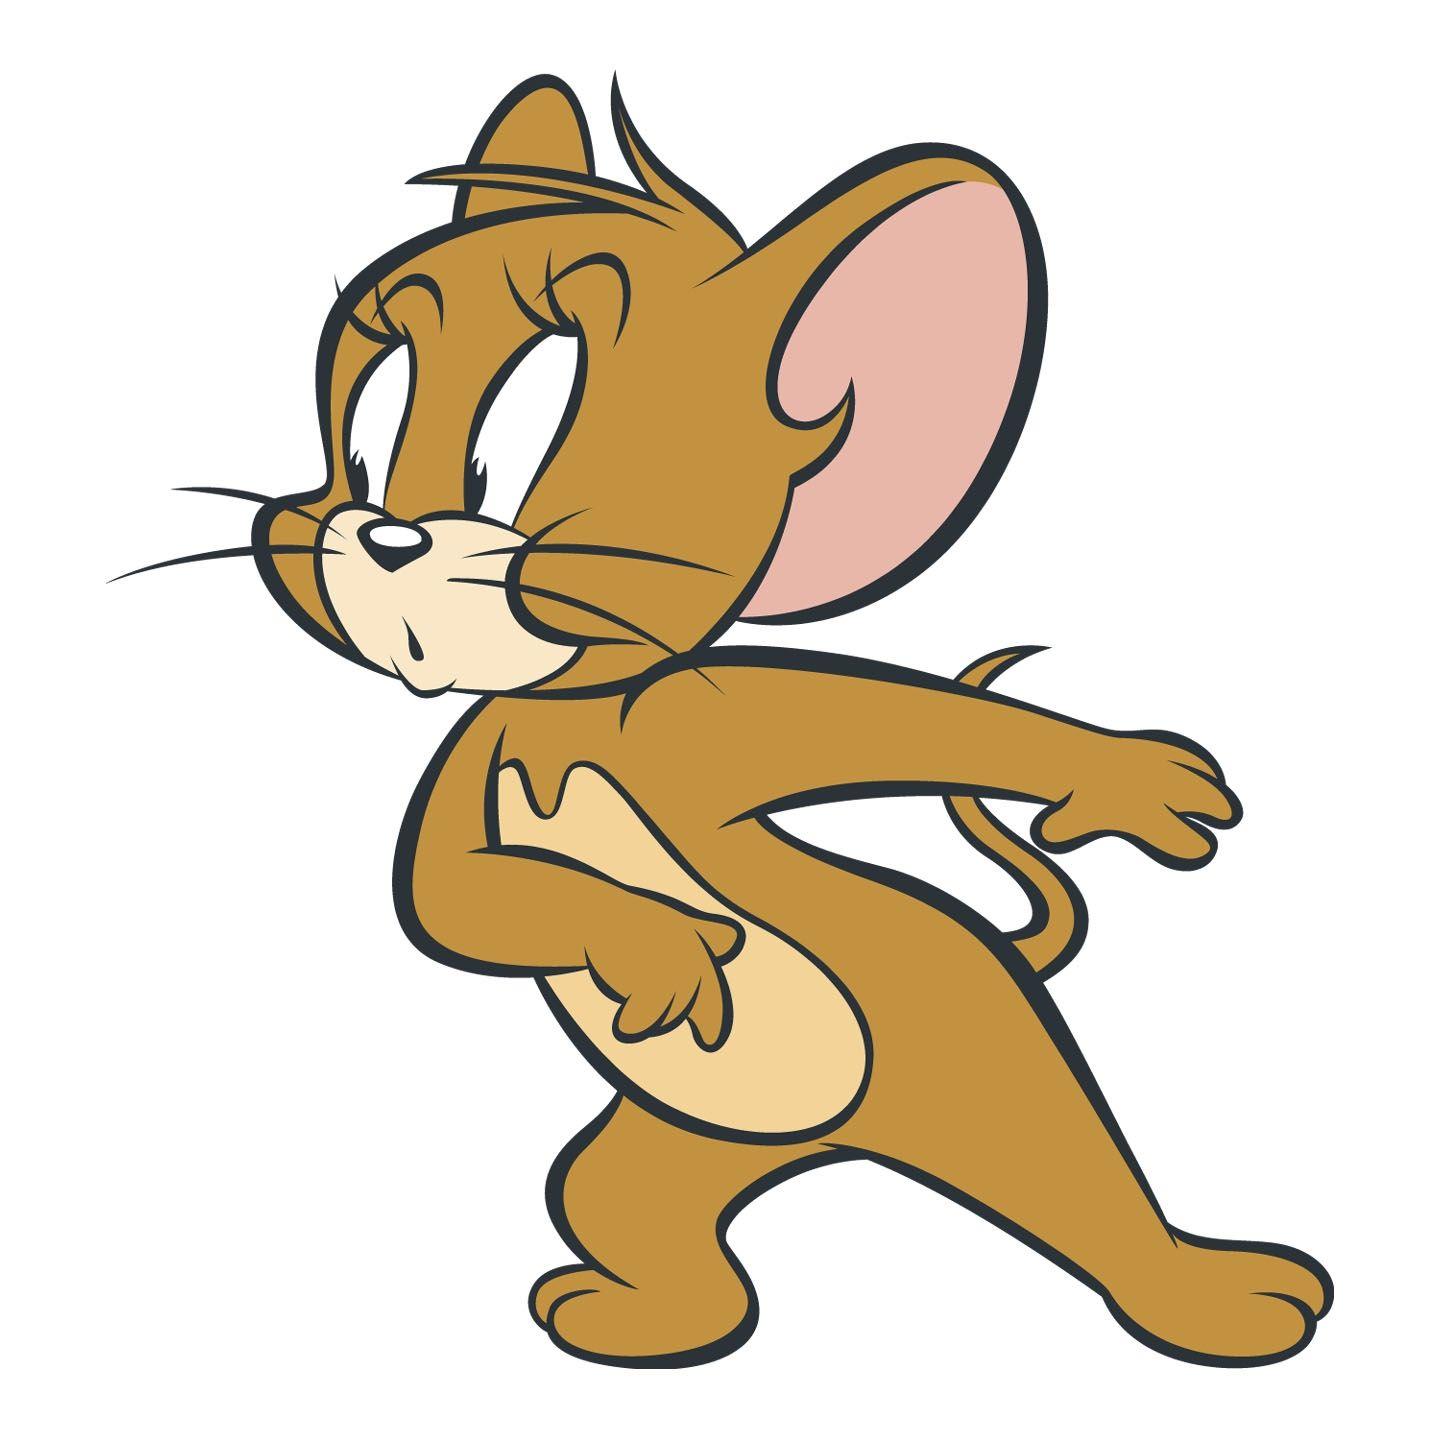 Jerry HD Image, Get Free top quality Jerry HD Image for your desktop PC background, io. Tom and jerry cartoon, Tom and jerry wallpaper, Tom and jerry picture